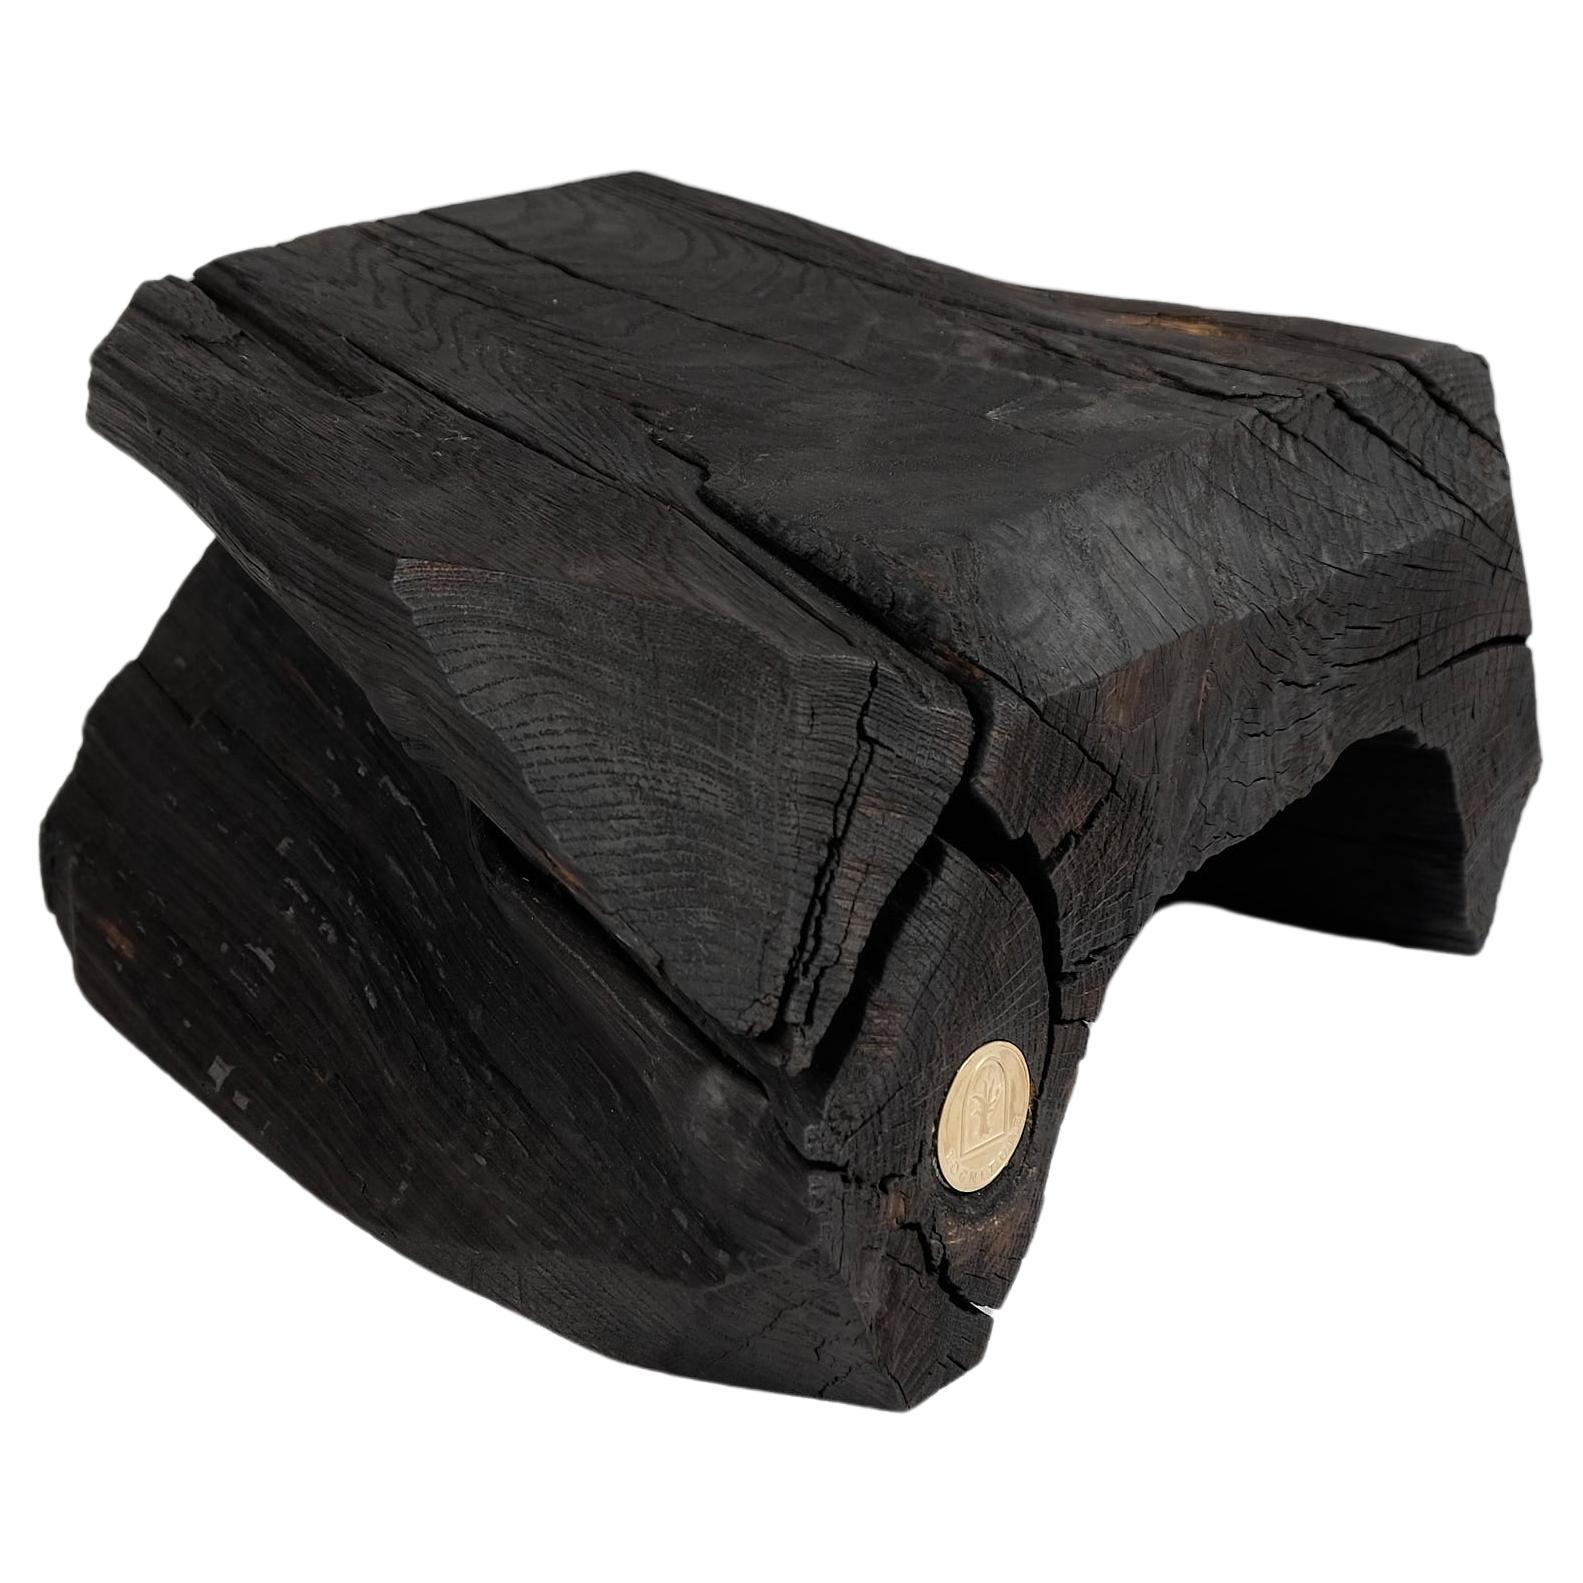 Solid Burnt Wood, Side Table, Stool, Original Contemporary Design